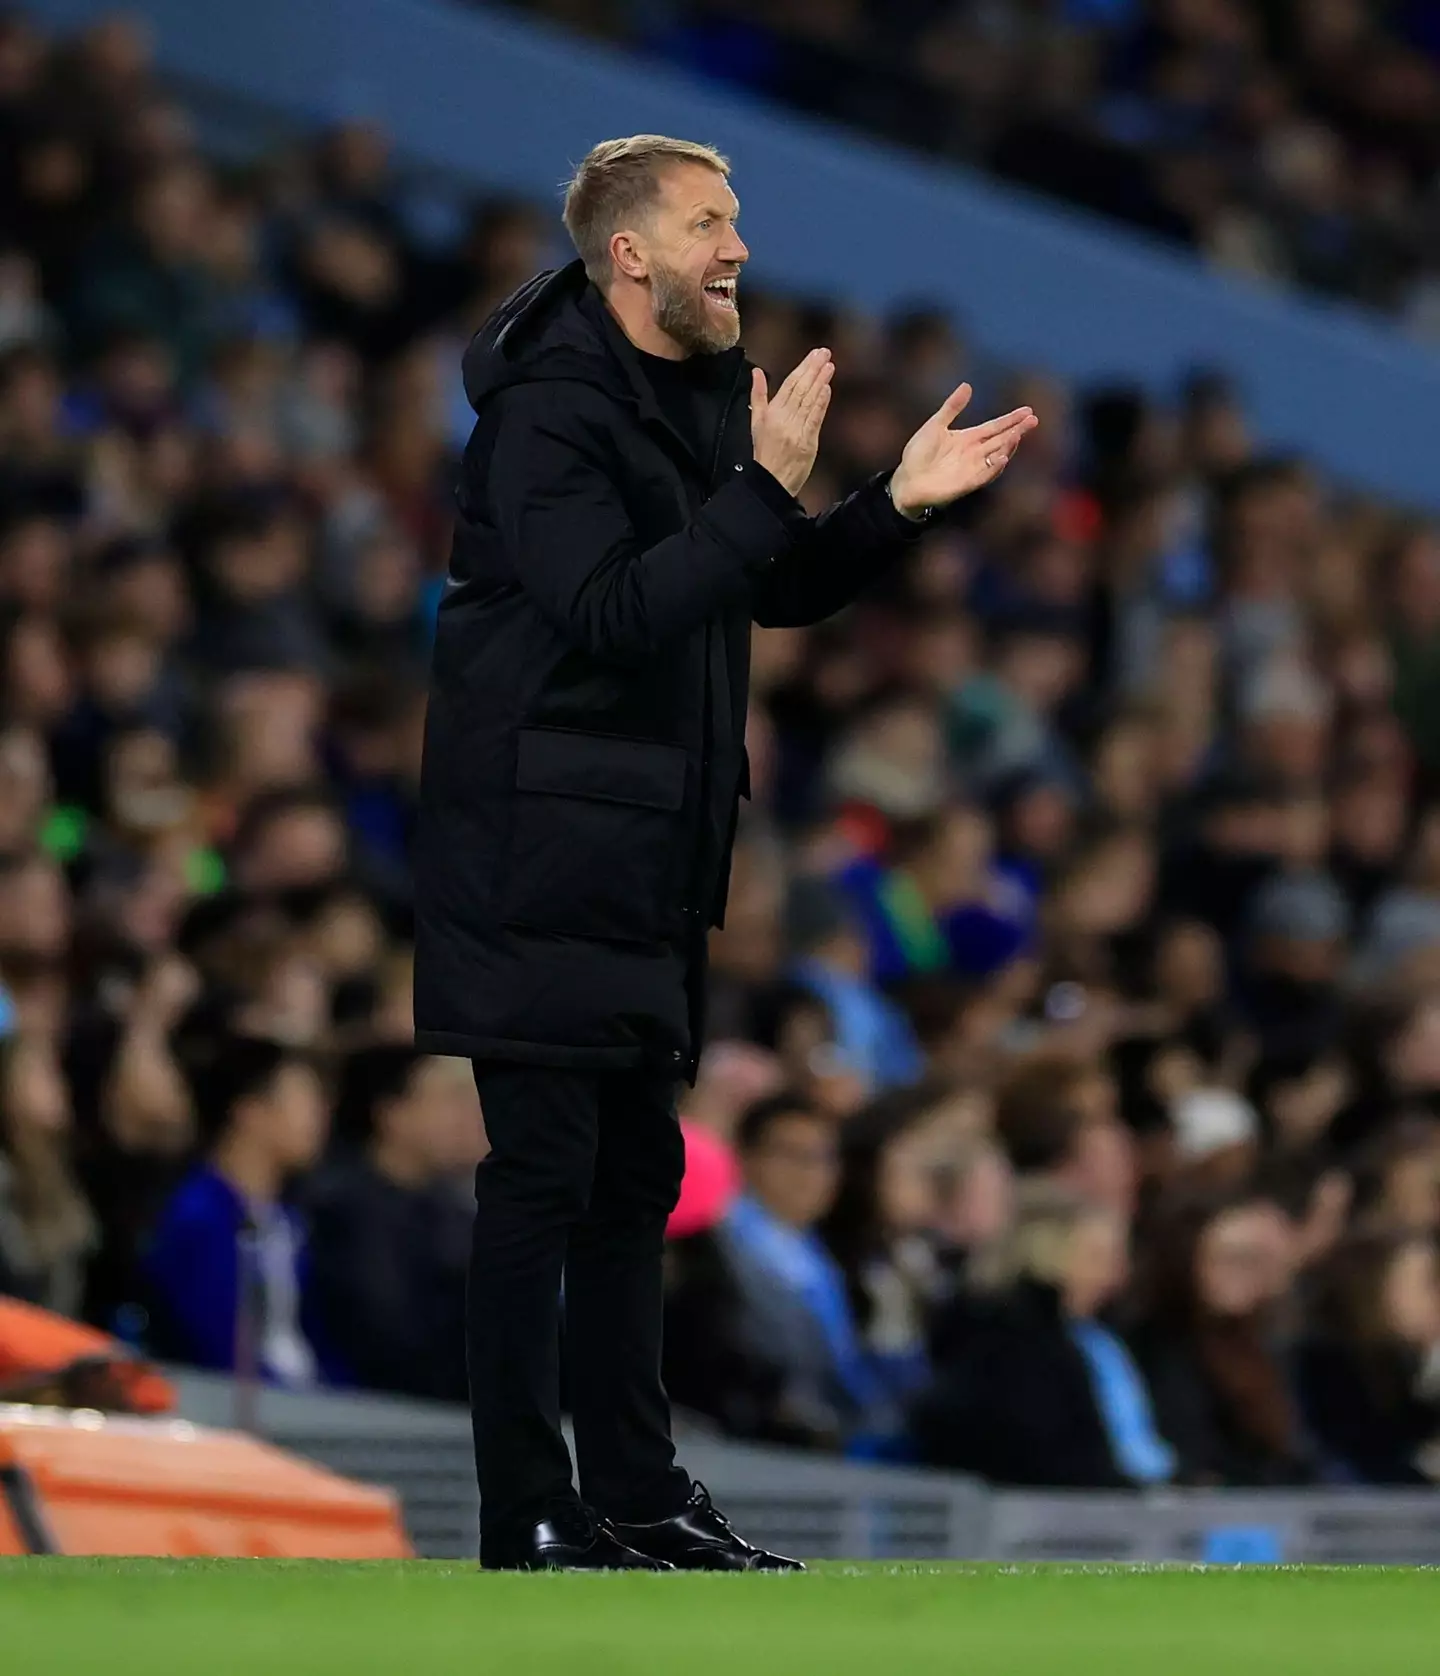 Graham Potter on the sidelines during the Carabao Cup Third Round match Manchester City vs Chelsea. (Alamy)